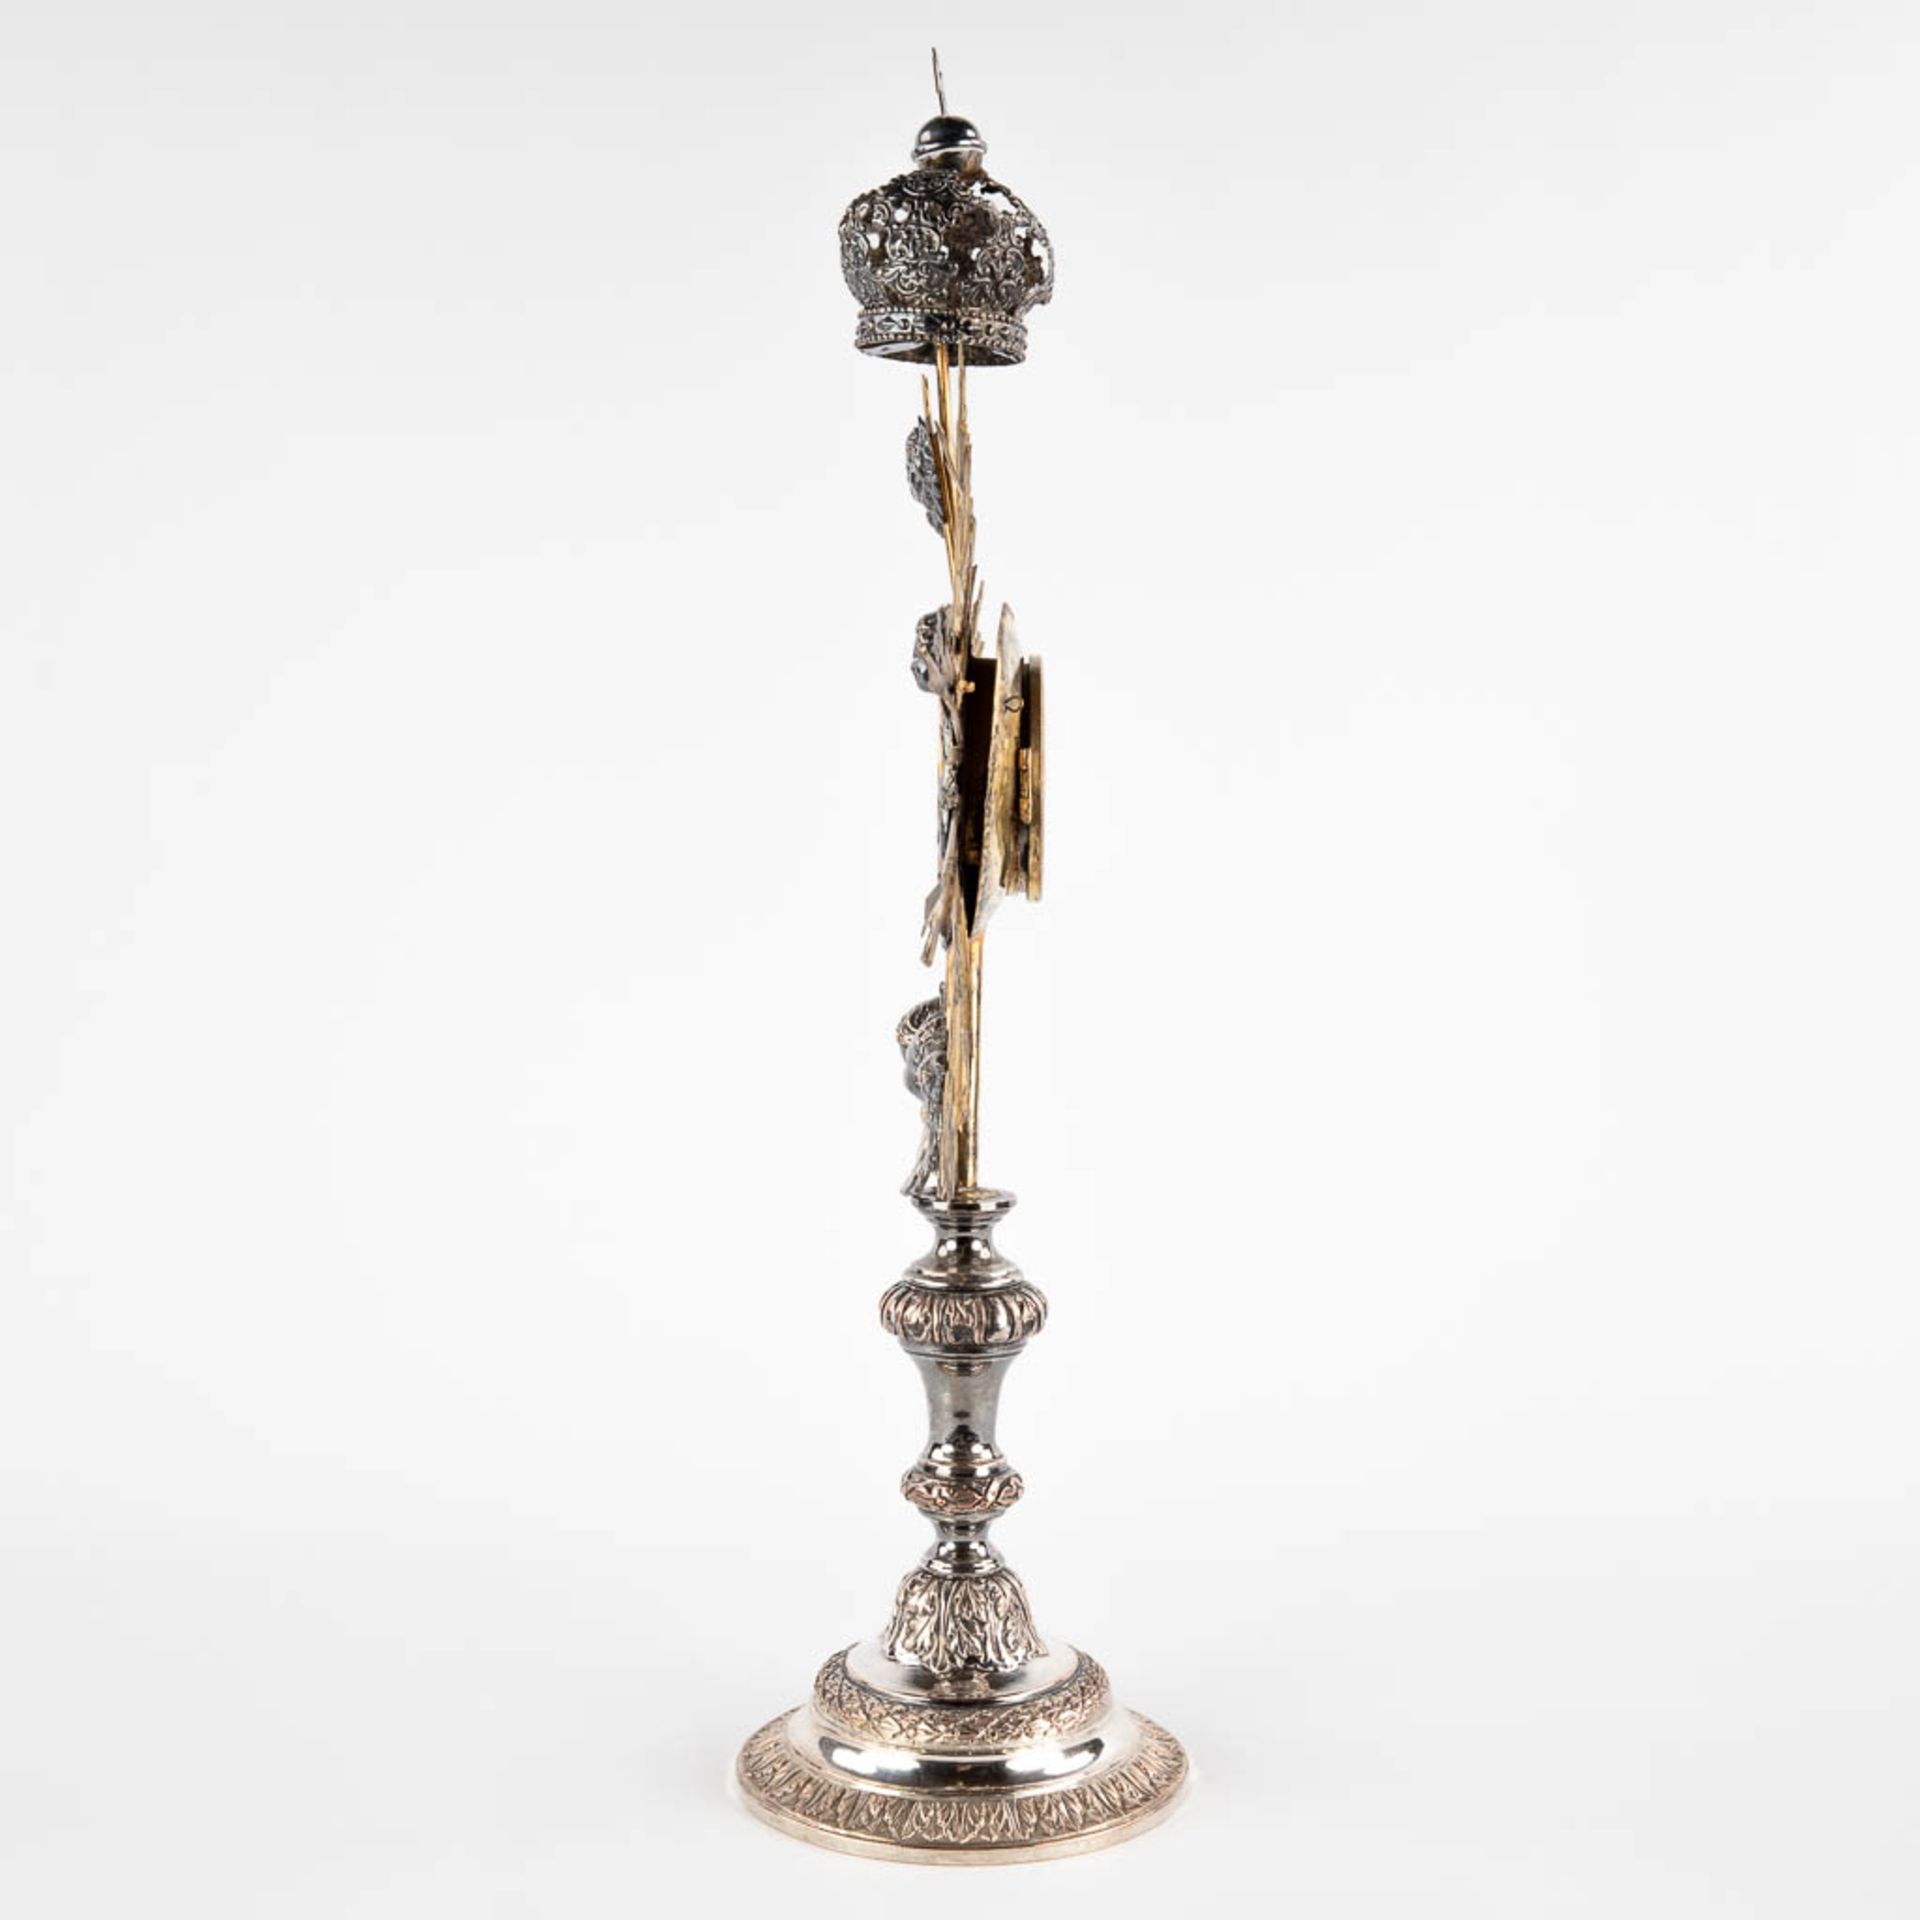 A sunburst monstrance, silver-plated metal and brass. Circa 1900. (D:15 x W:29 x H:57 cm) - Image 6 of 14